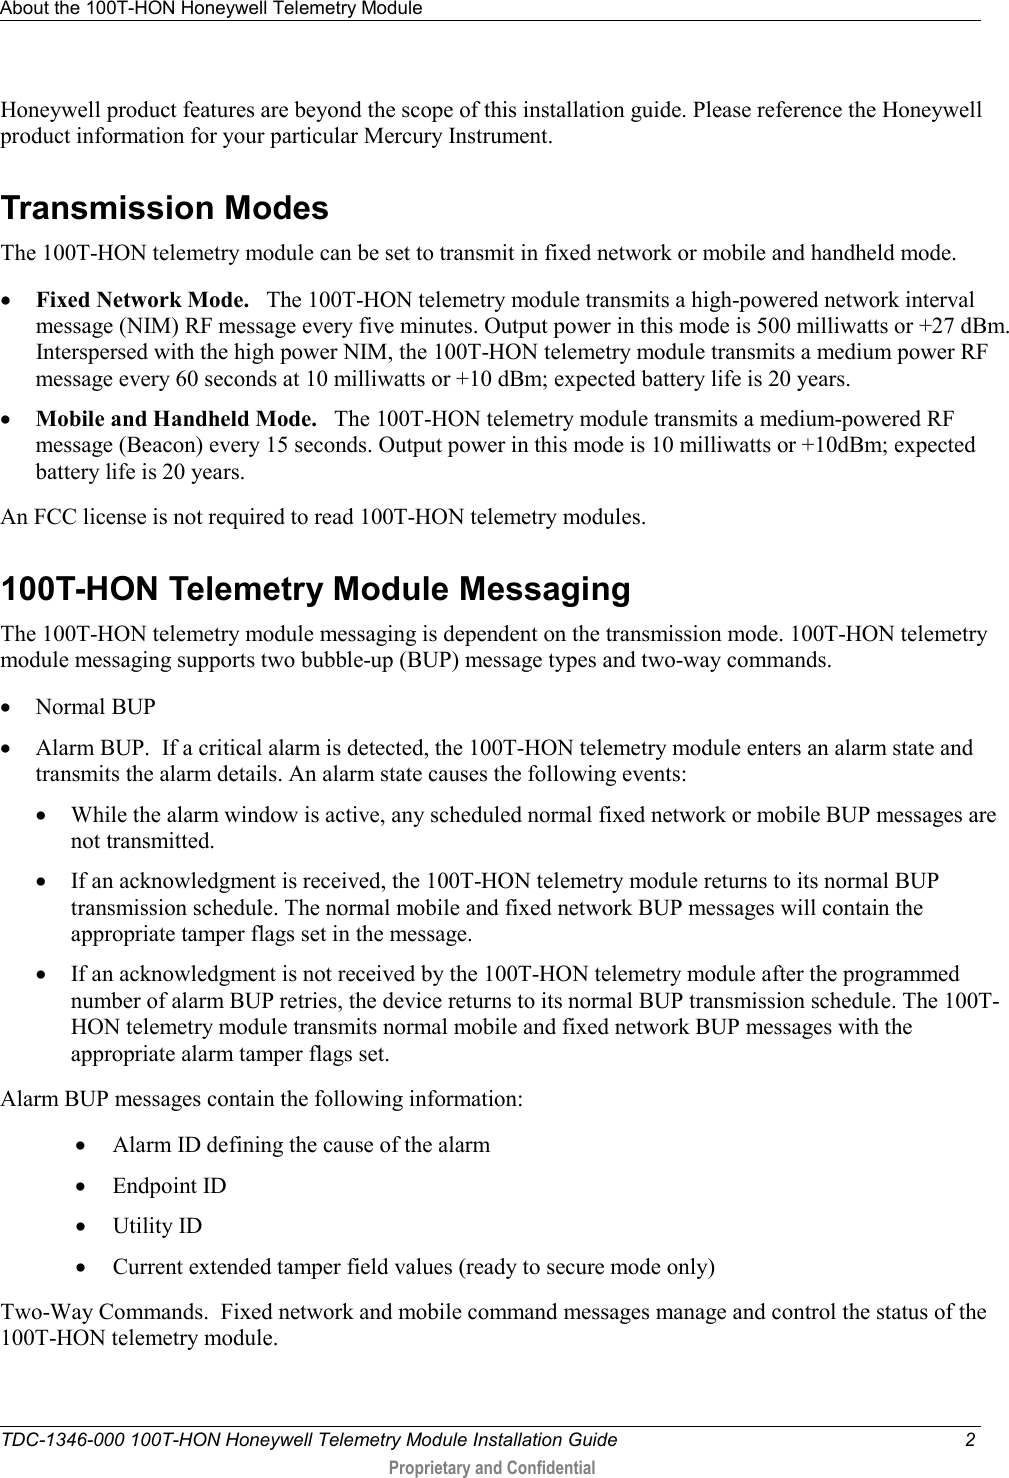 About the 100T-HON Honeywell Telemetry Module   TDC-1346-000 100T-HON Honeywell Telemetry Module Installation Guide  2  Proprietary and Confidential    Honeywell product features are beyond the scope of this installation guide. Please reference the Honeywell product information for your particular Mercury Instrument.   Transmission Modes The 100T-HON telemetry module can be set to transmit in fixed network or mobile and handheld mode.  • Fixed Network Mode.   The 100T-HON telemetry module transmits a high-powered network interval message (NIM) RF message every five minutes. Output power in this mode is 500 milliwatts or +27 dBm. Interspersed with the high power NIM, the 100T-HON telemetry module transmits a medium power RF message every 60 seconds at 10 milliwatts or +10 dBm; expected battery life is 20 years.  • Mobile and Handheld Mode.   The 100T-HON telemetry module transmits a medium-powered RF message (Beacon) every 15 seconds. Output power in this mode is 10 milliwatts or +10dBm; expected battery life is 20 years.   An FCC license is not required to read 100T-HON telemetry modules.   100T-HON Telemetry Module Messaging The 100T-HON telemetry module messaging is dependent on the transmission mode. 100T-HON telemetry module messaging supports two bubble-up (BUP) message types and two-way commands. • Normal BUP • Alarm BUP.  If a critical alarm is detected, the 100T-HON telemetry module enters an alarm state and transmits the alarm details. An alarm state causes the following events: • While the alarm window is active, any scheduled normal fixed network or mobile BUP messages are not transmitted.   • If an acknowledgment is received, the 100T-HON telemetry module returns to its normal BUP transmission schedule. The normal mobile and fixed network BUP messages will contain the appropriate tamper flags set in the message. • If an acknowledgment is not received by the 100T-HON telemetry module after the programmed number of alarm BUP retries, the device returns to its normal BUP transmission schedule. The 100T-HON telemetry module transmits normal mobile and fixed network BUP messages with the appropriate alarm tamper flags set.  Alarm BUP messages contain the following information: • Alarm ID defining the cause of the alarm • Endpoint ID • Utility ID • Current extended tamper field values (ready to secure mode only) Two-Way Commands.  Fixed network and mobile command messages manage and control the status of the 100T-HON telemetry module.  